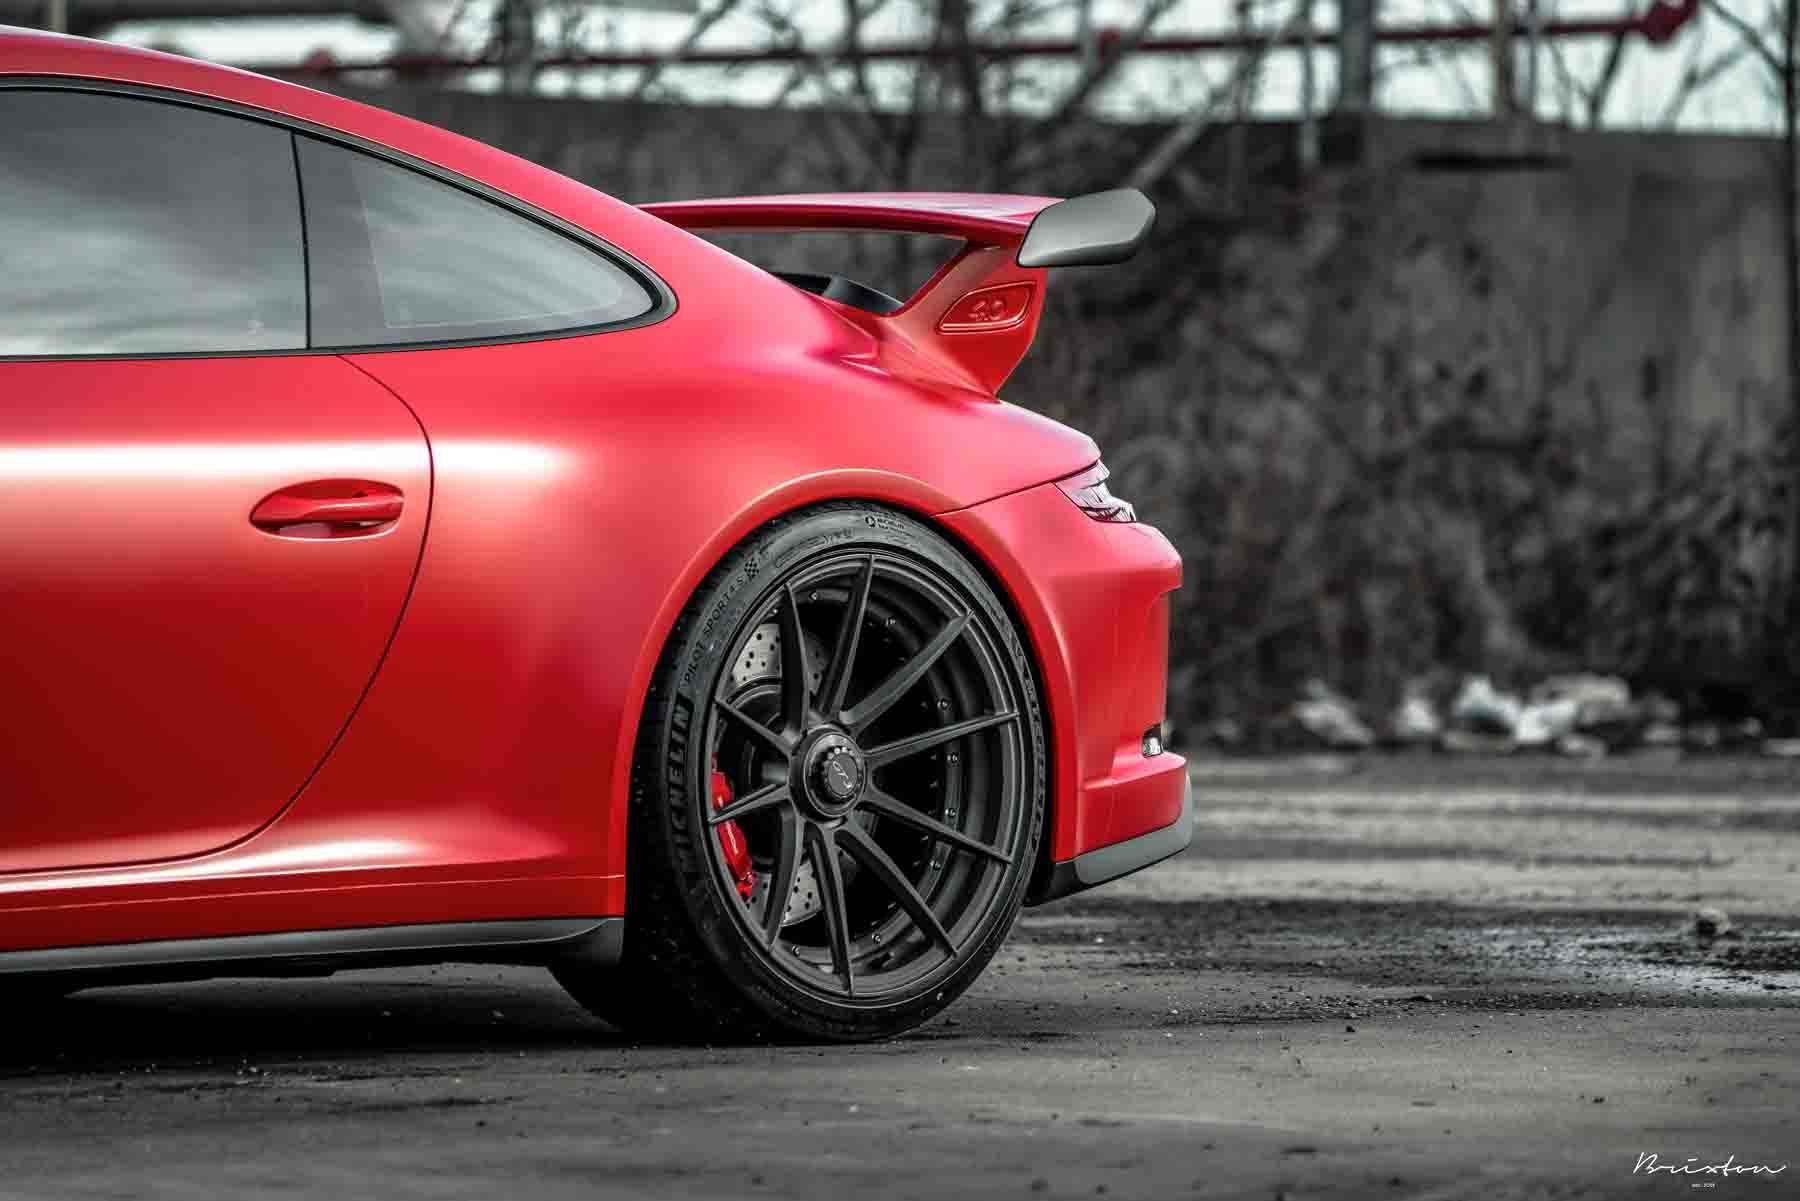 images-products-1-2402-232974690-brixton-forged-wr3-red-porsche-991-gt3-9912-20-concave-forged-wheels-center-lock-5.jpg